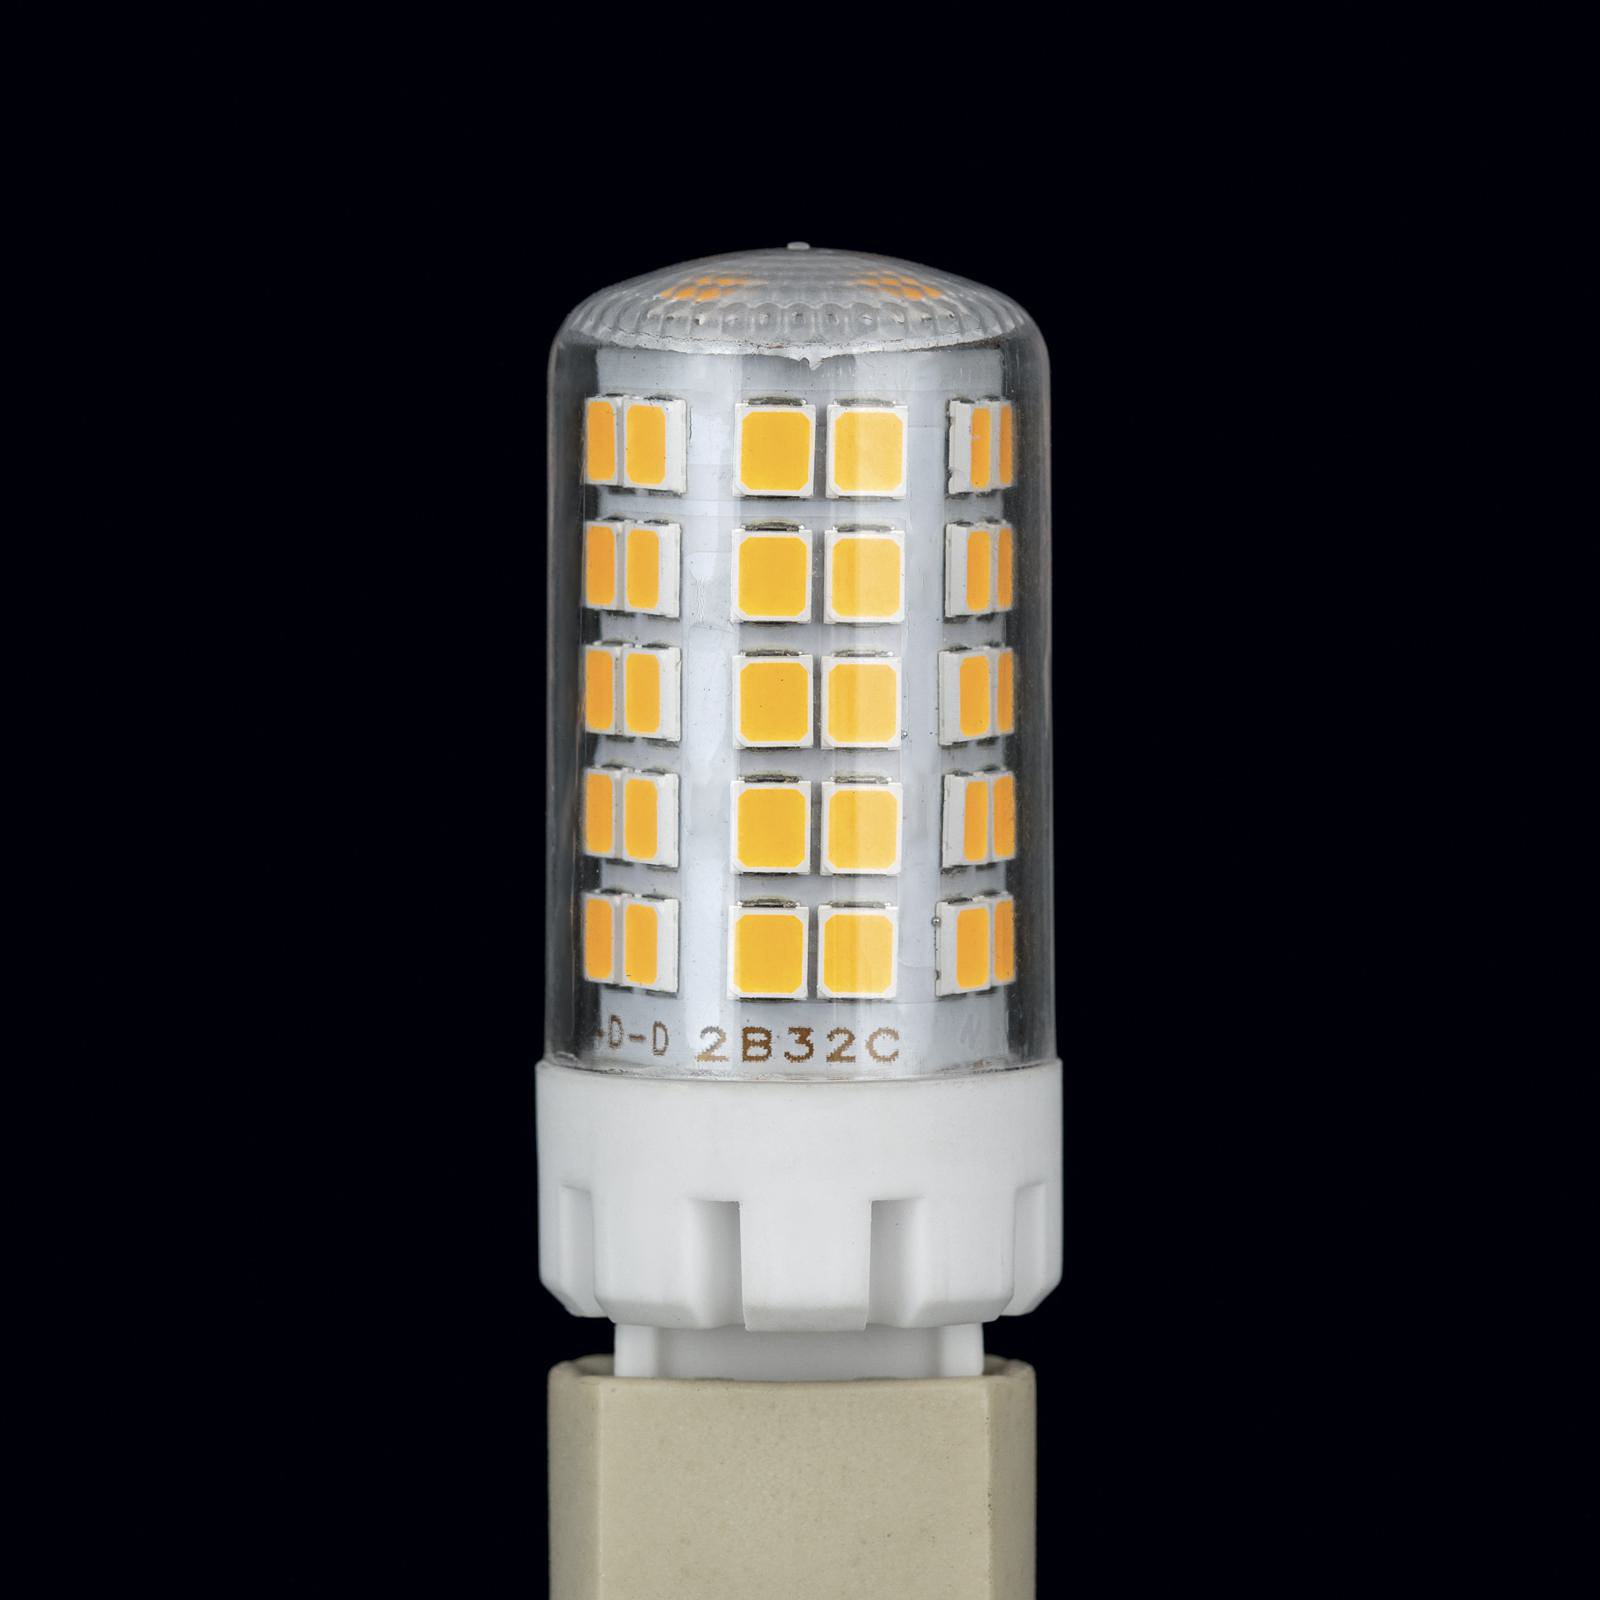 Bi-pin LED bulb, clear, G9, 5 W, 2,700 K, 500 lm, dimmable